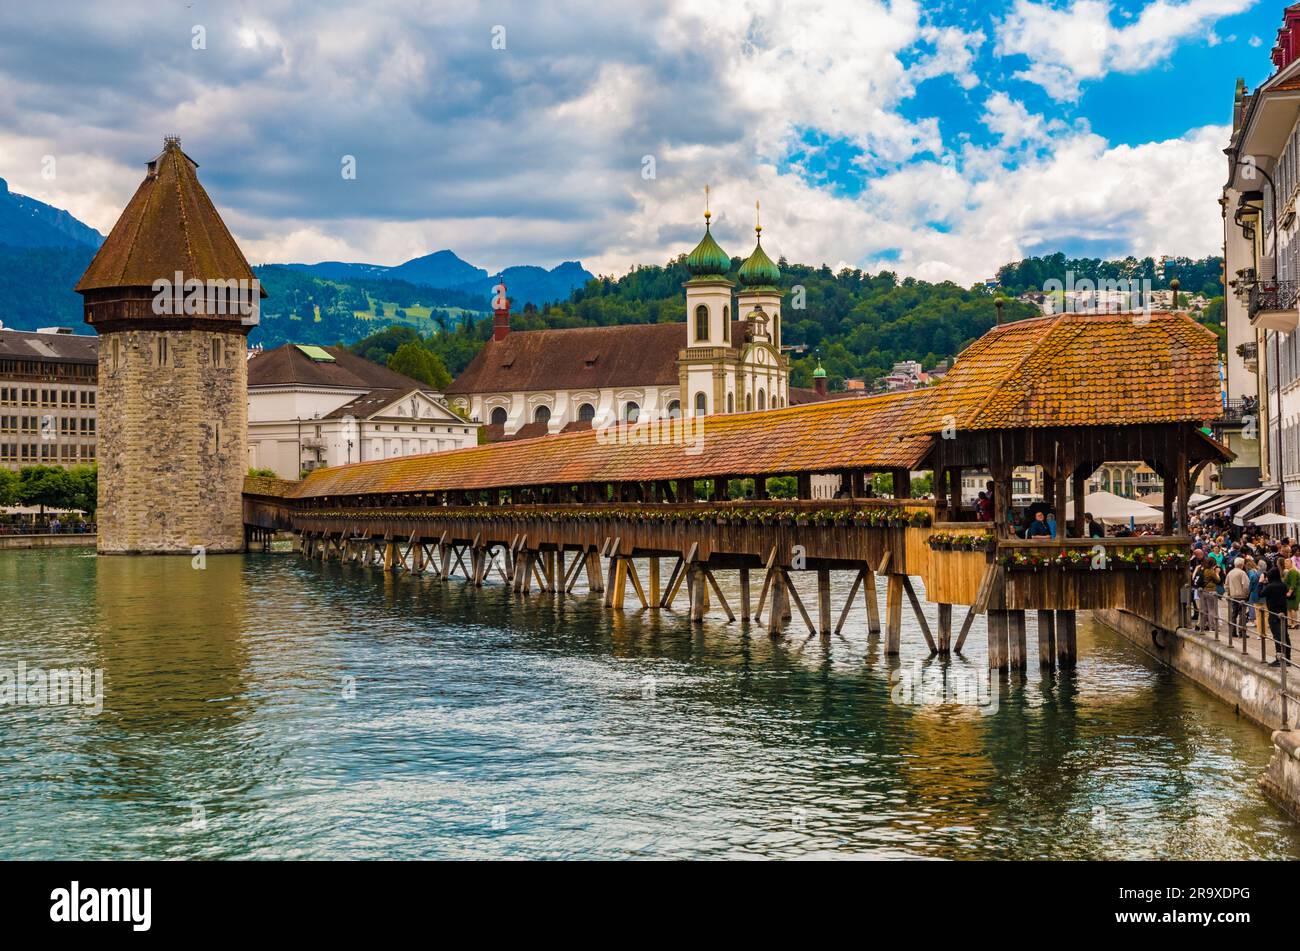 The famous covered timber footbridge Kapellbrücke (Chapel Bridge) with Water Tower over the river Reuss at the street Rathausquai. The Jesuit Church... Stock Photo